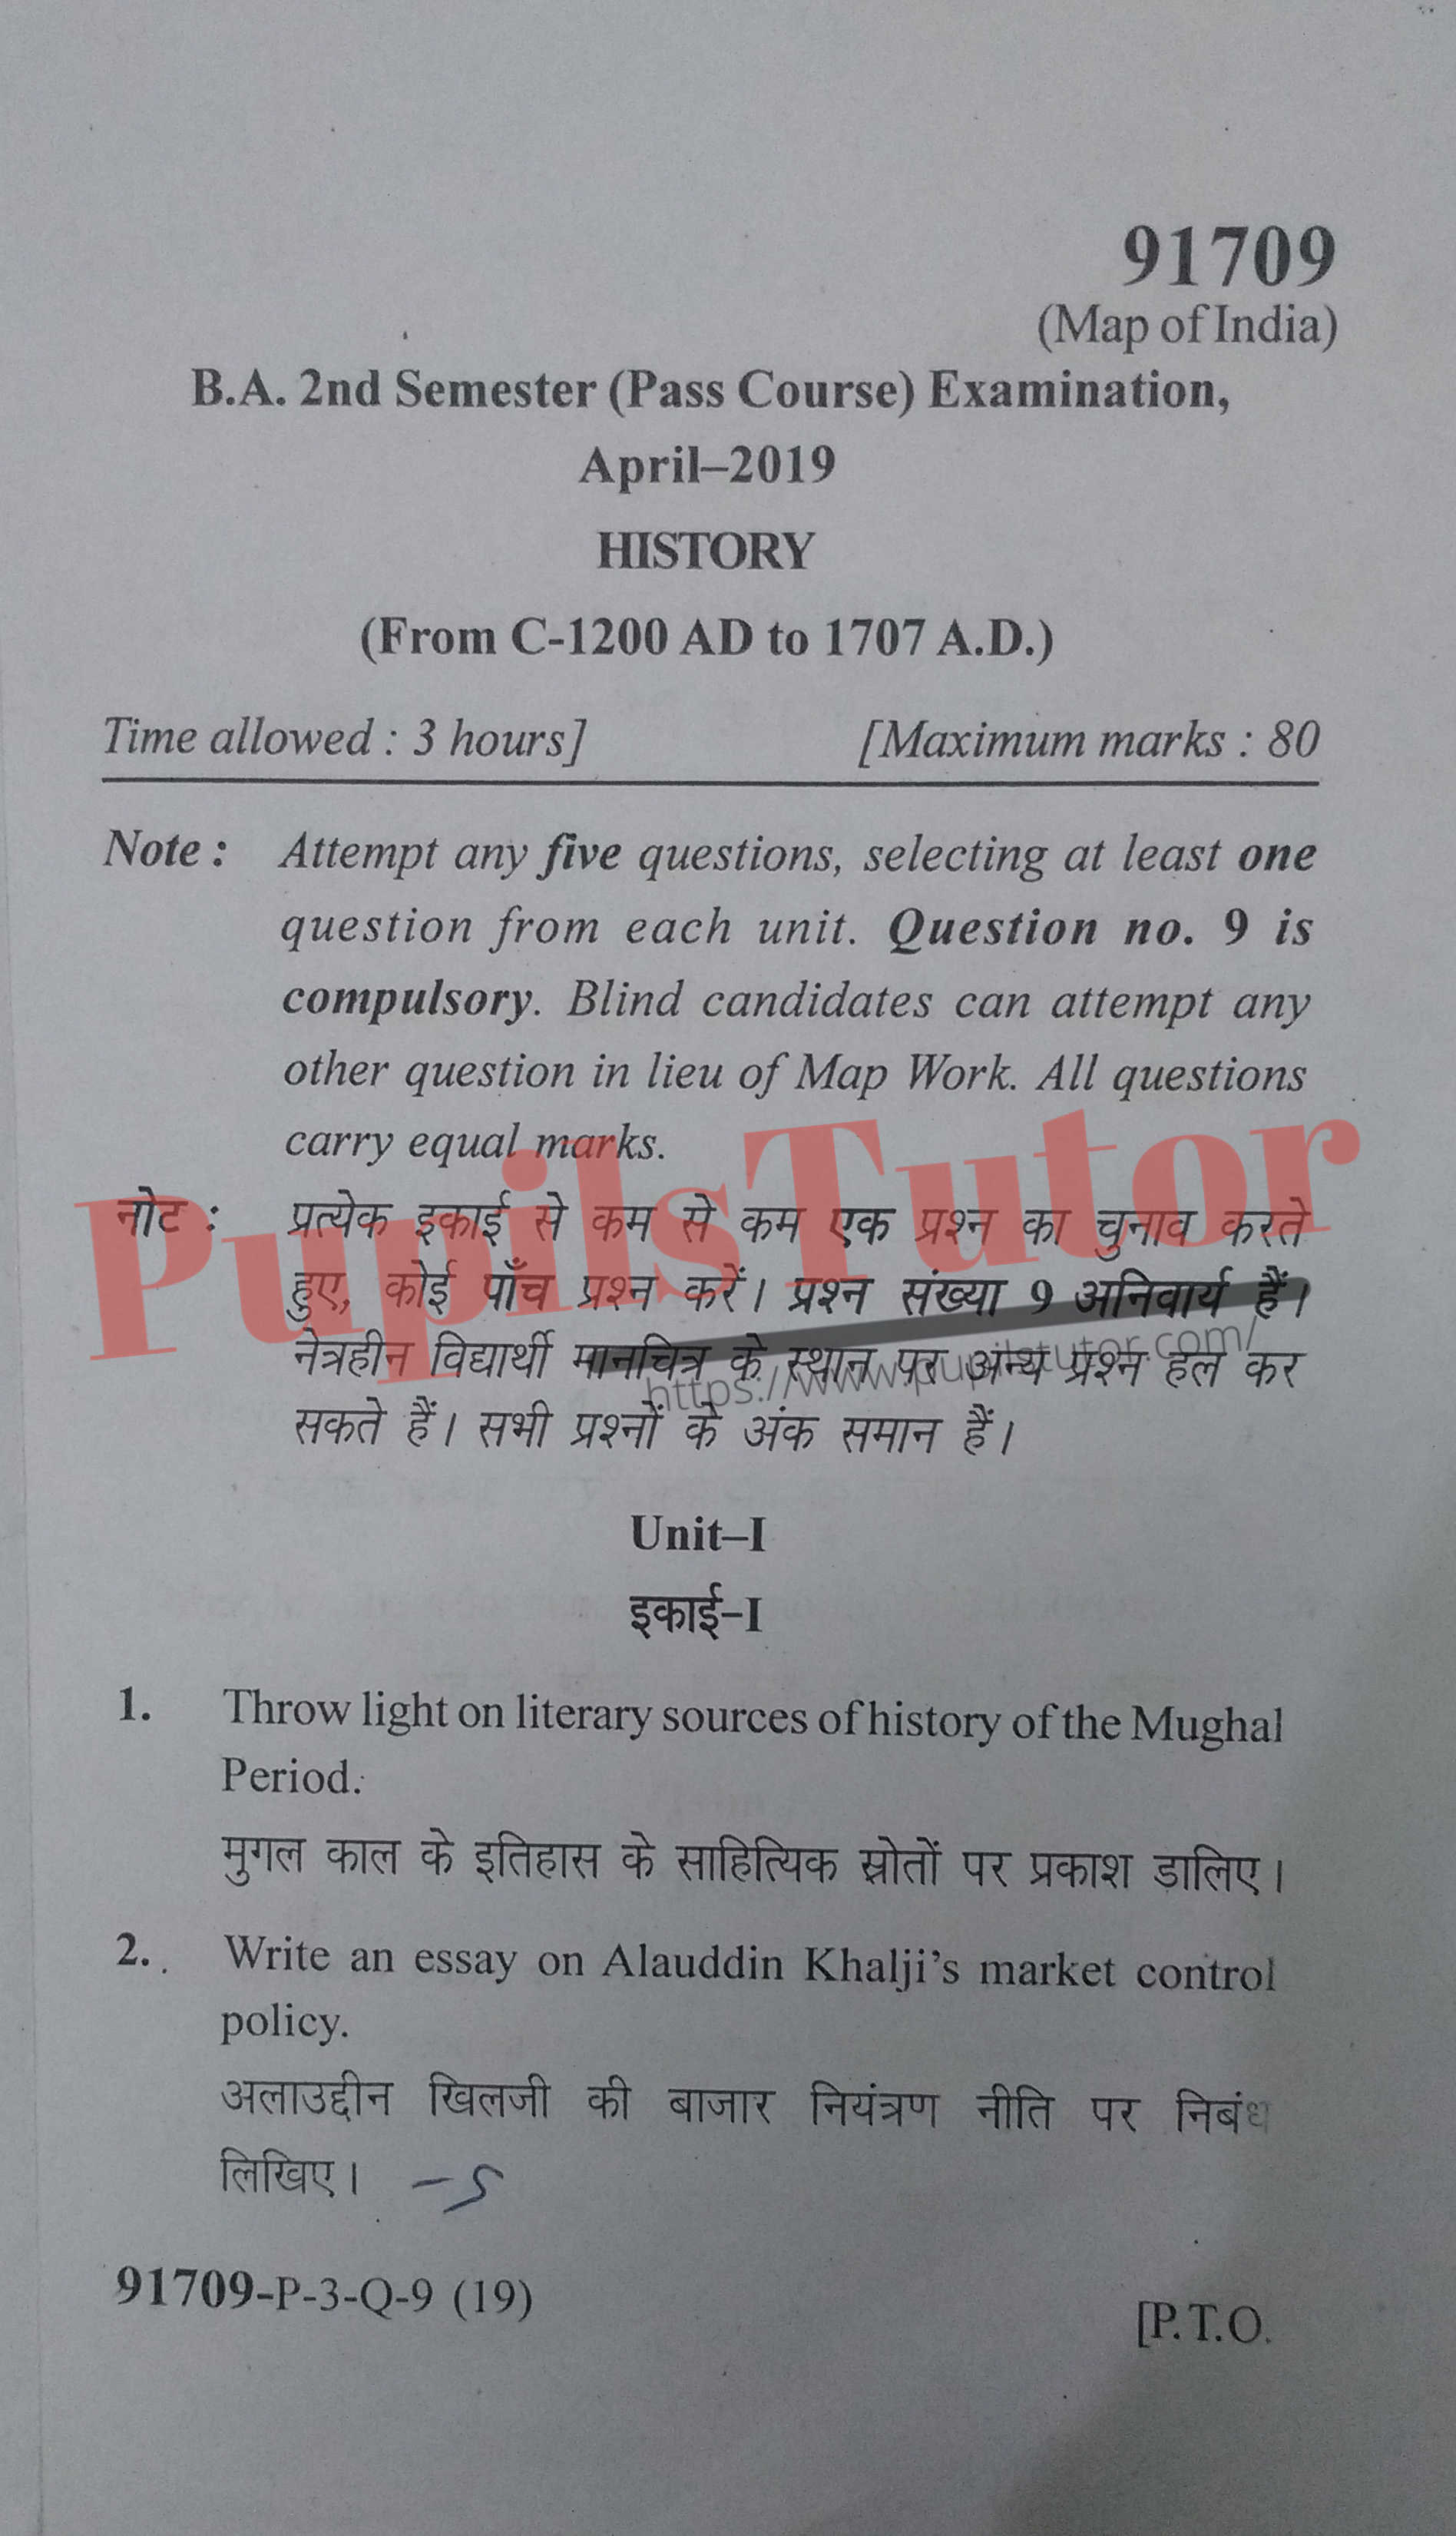 MDU (Maharshi Dayanand University, Rohtak Haryana) BA Pass Course Second Semester Previous Year History Question Paper For April, 2019 Exam (Question Paper Page 1) - pupilstutor.com